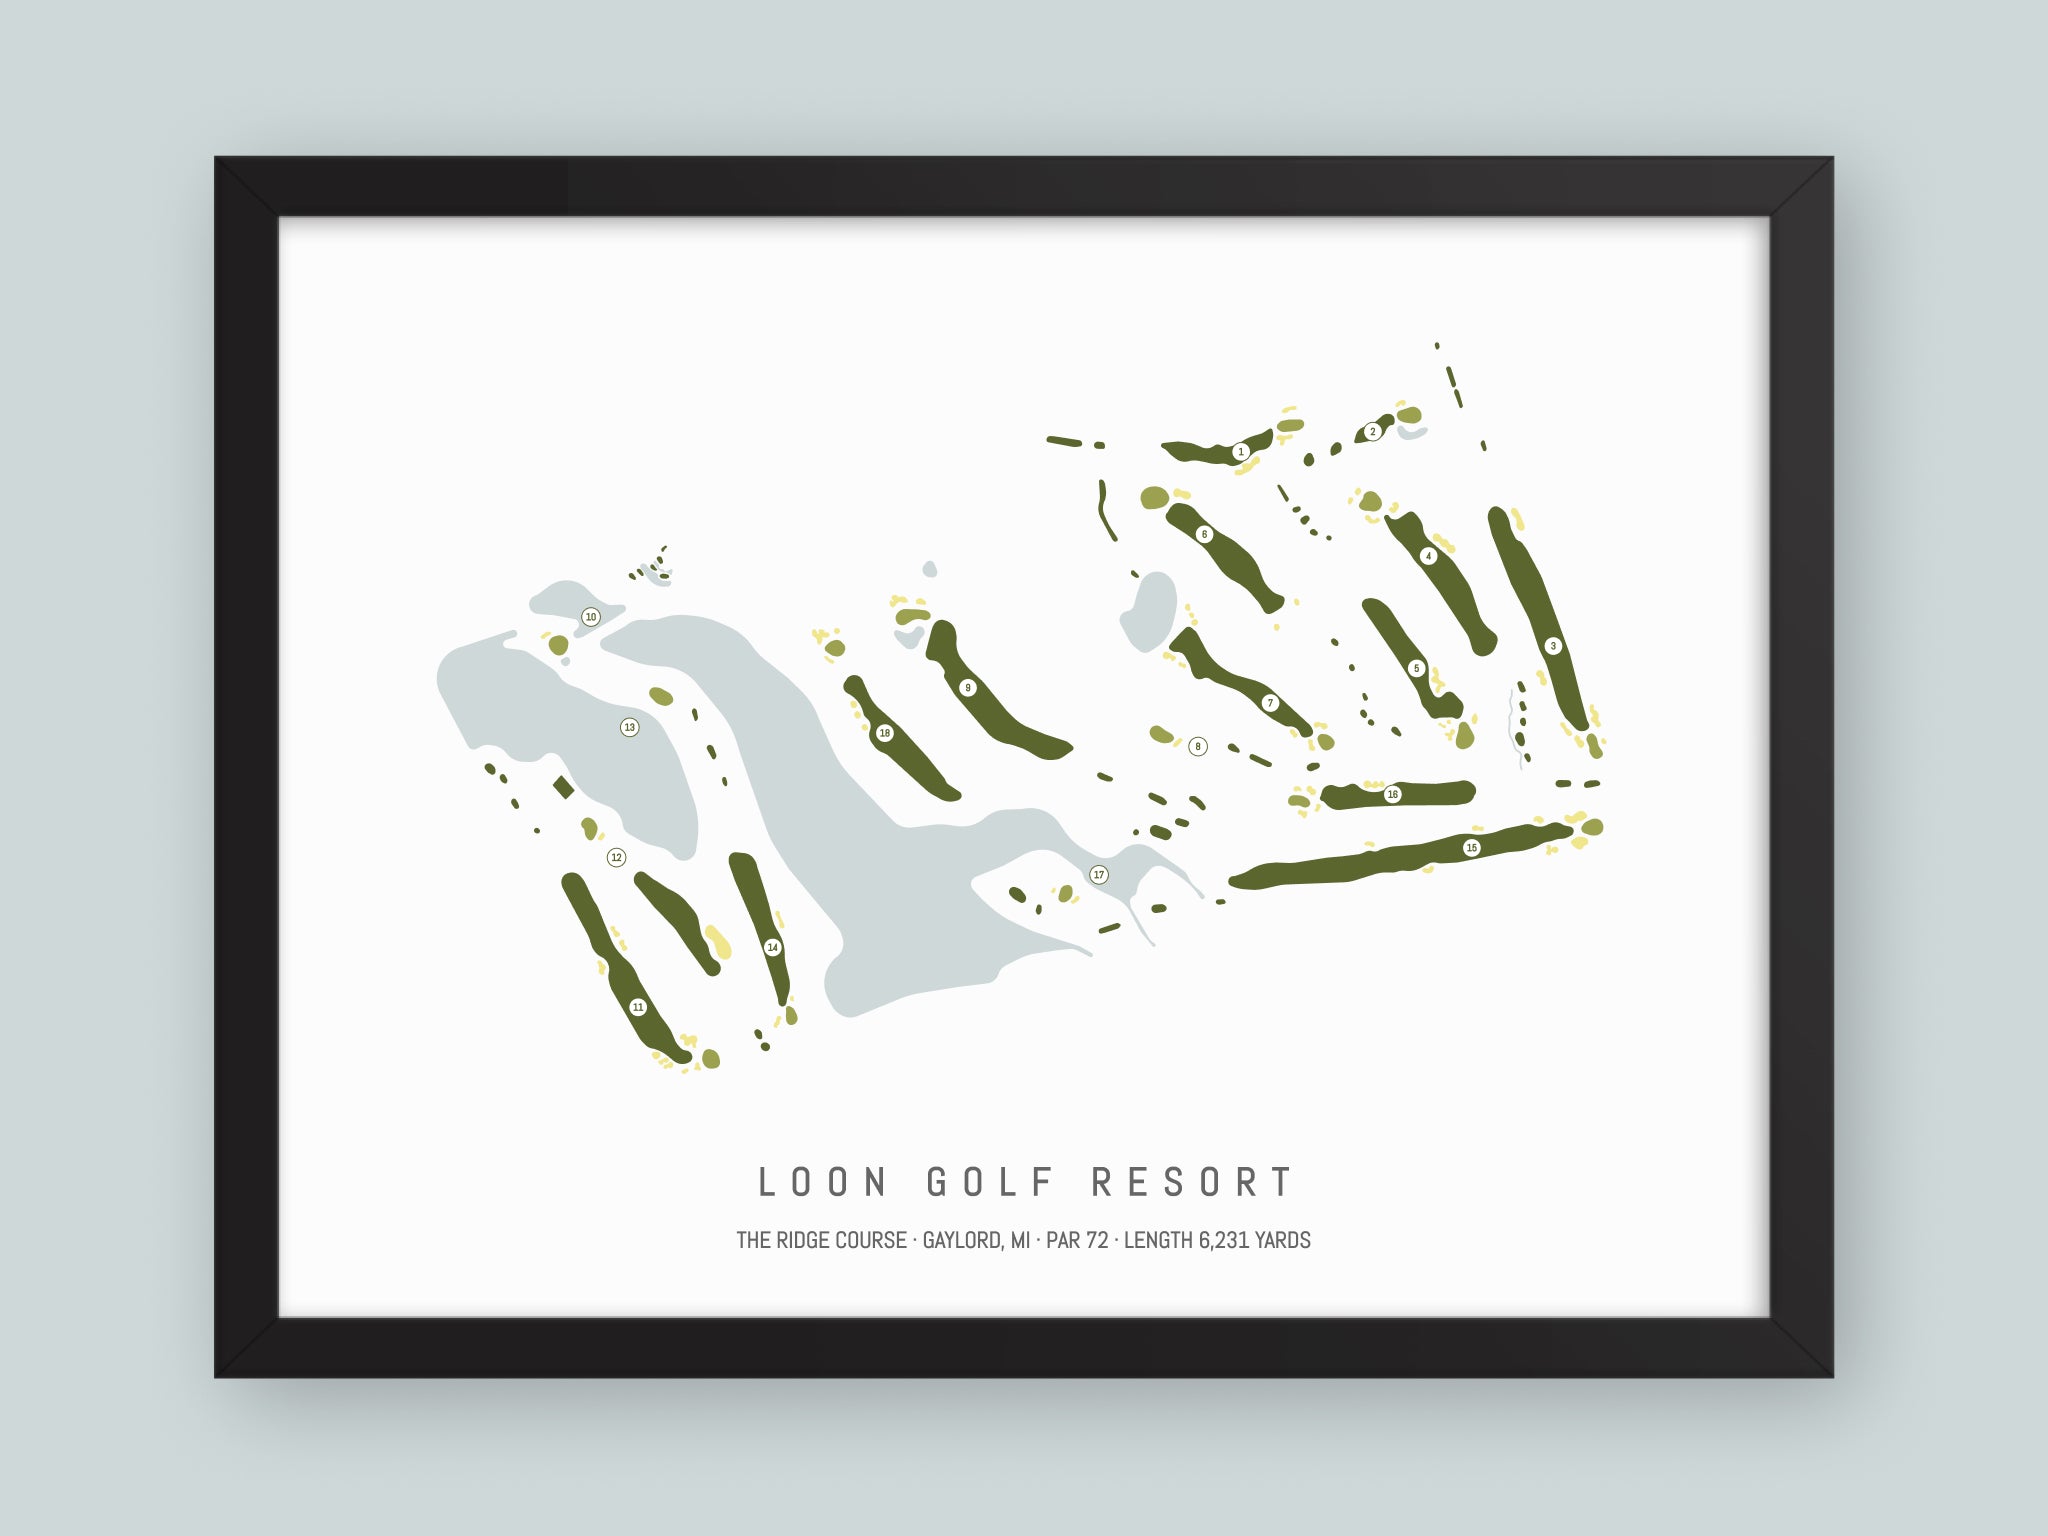 Loon-Golf-Resort-The-Ridge-Course-MI--Black-Frame-24x18-With-Hole-Numbers